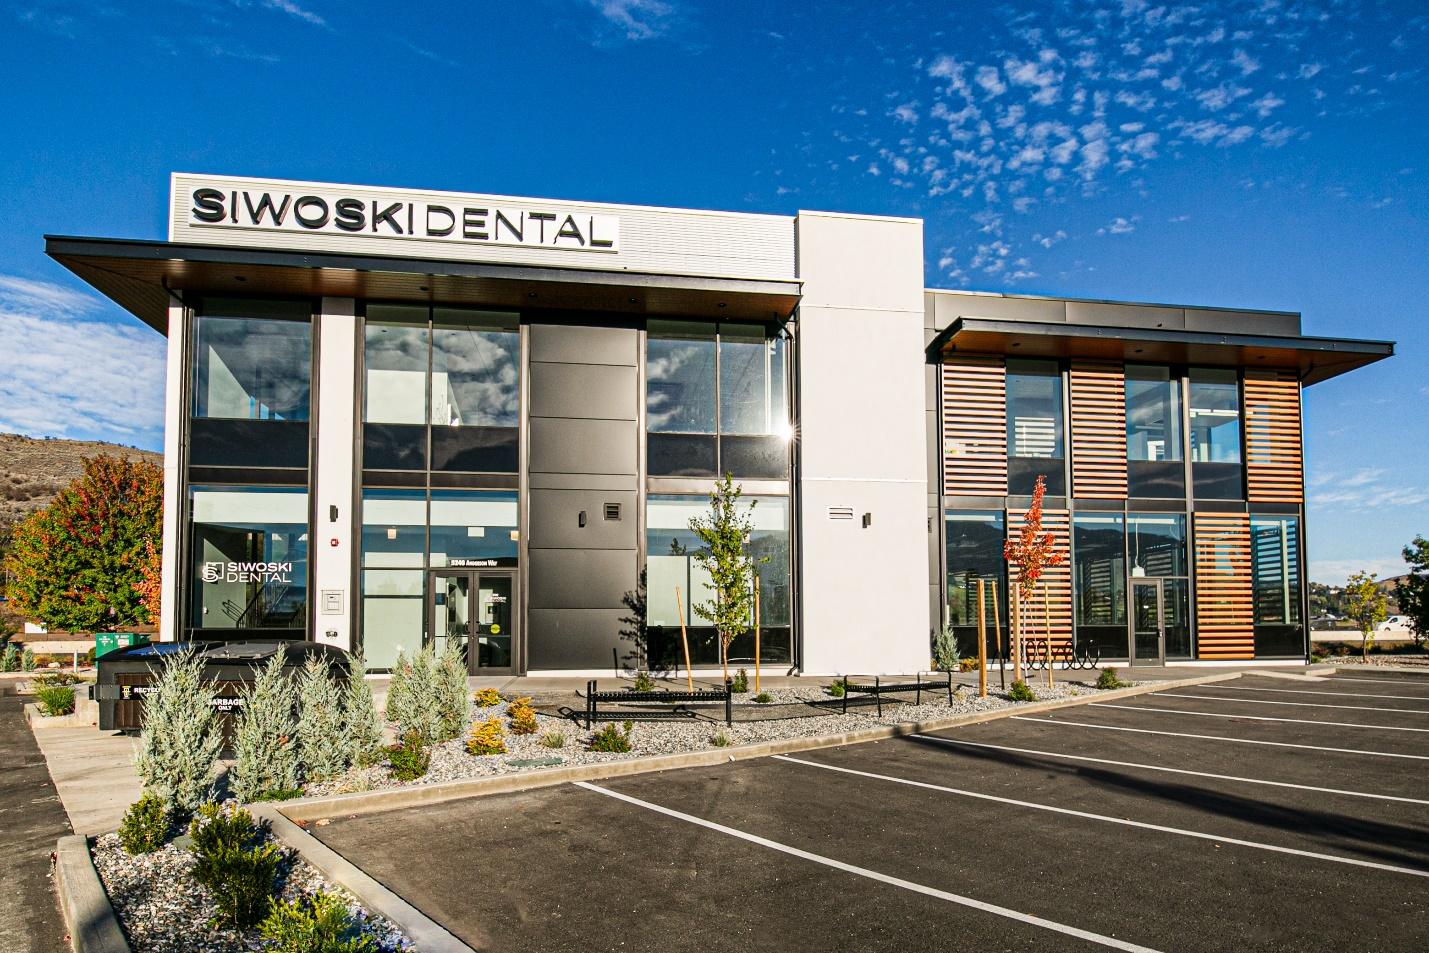 An exterior view of Siwoski dental with the front parking lot, a turnkey project by Chriscan Construction